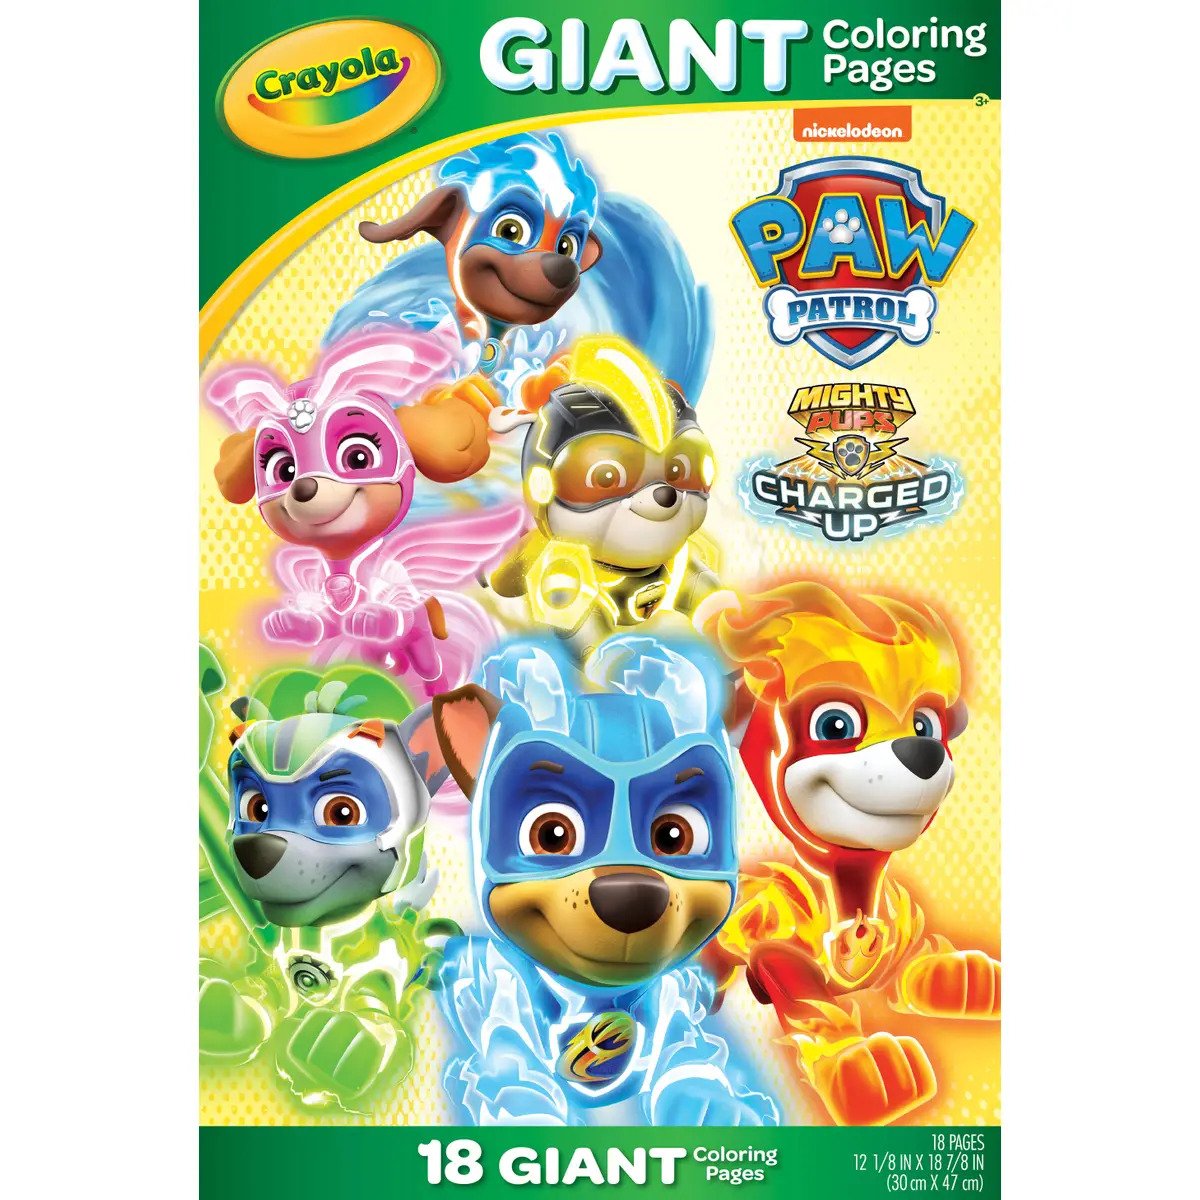 Giant Coloring Pages – Paw Patrol – Awesome Toys Gifts